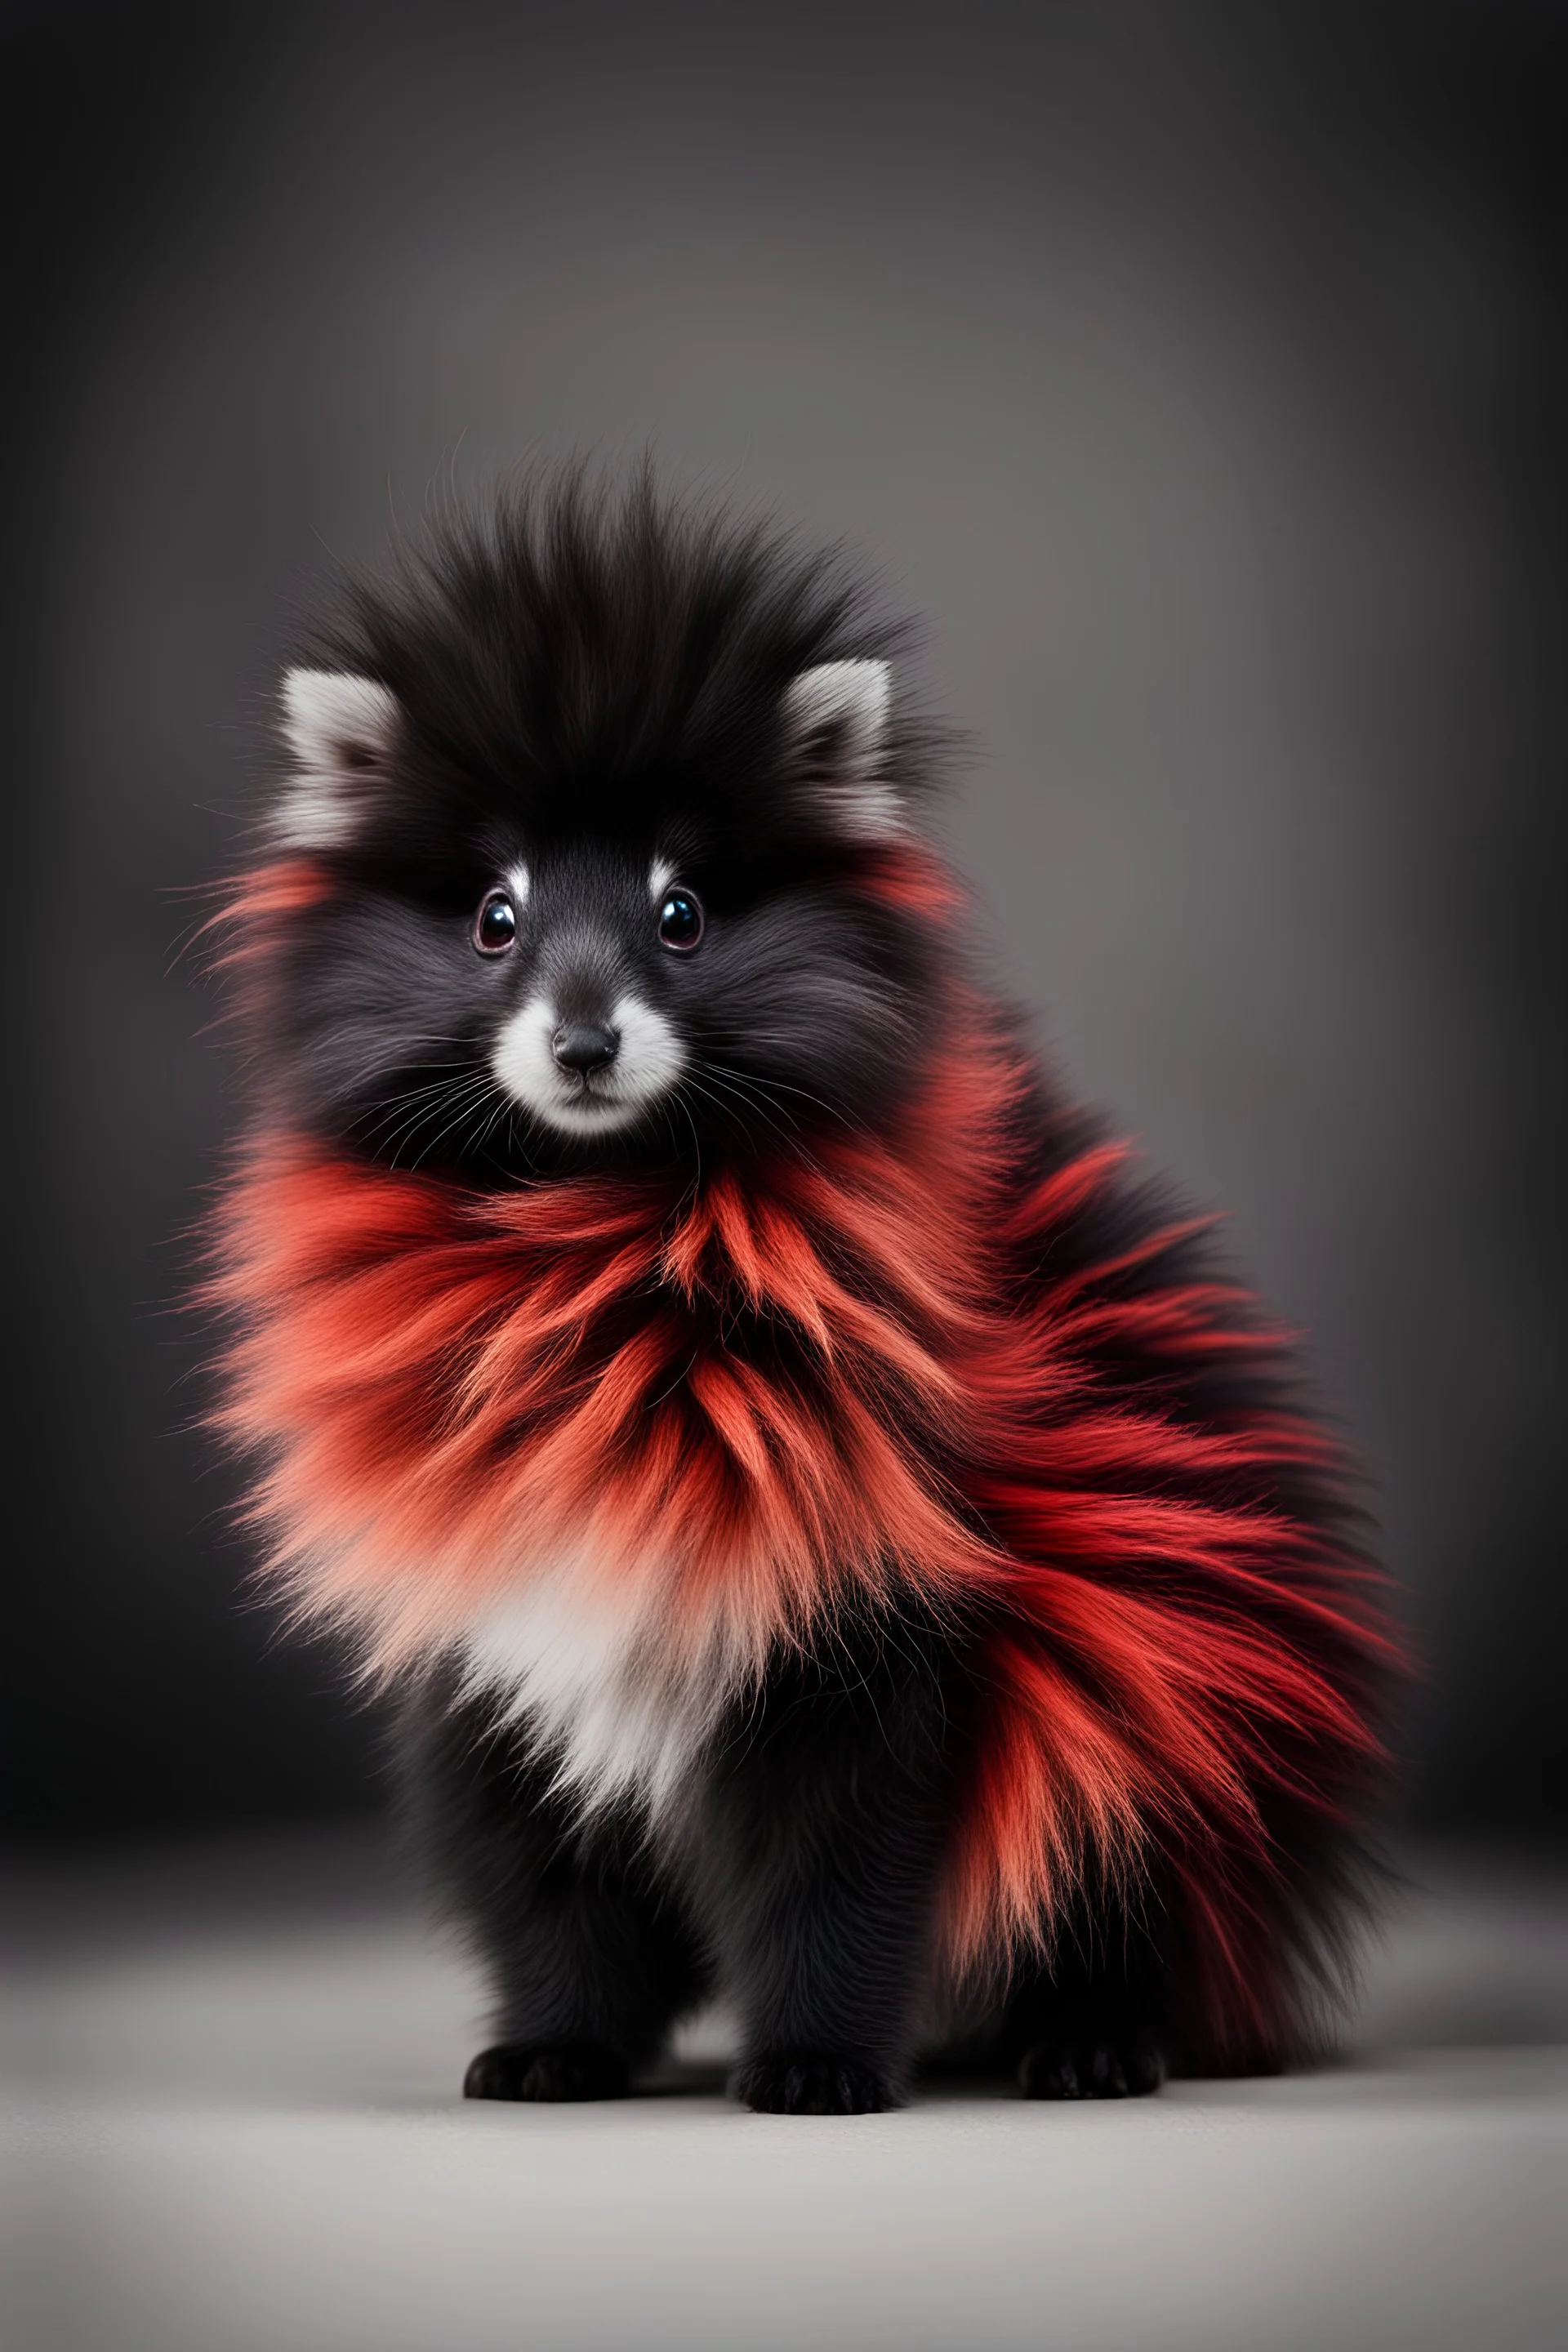 a small animal, red in color,fluffy,black fluffy stripes.stylization,composition,hyperdetalization